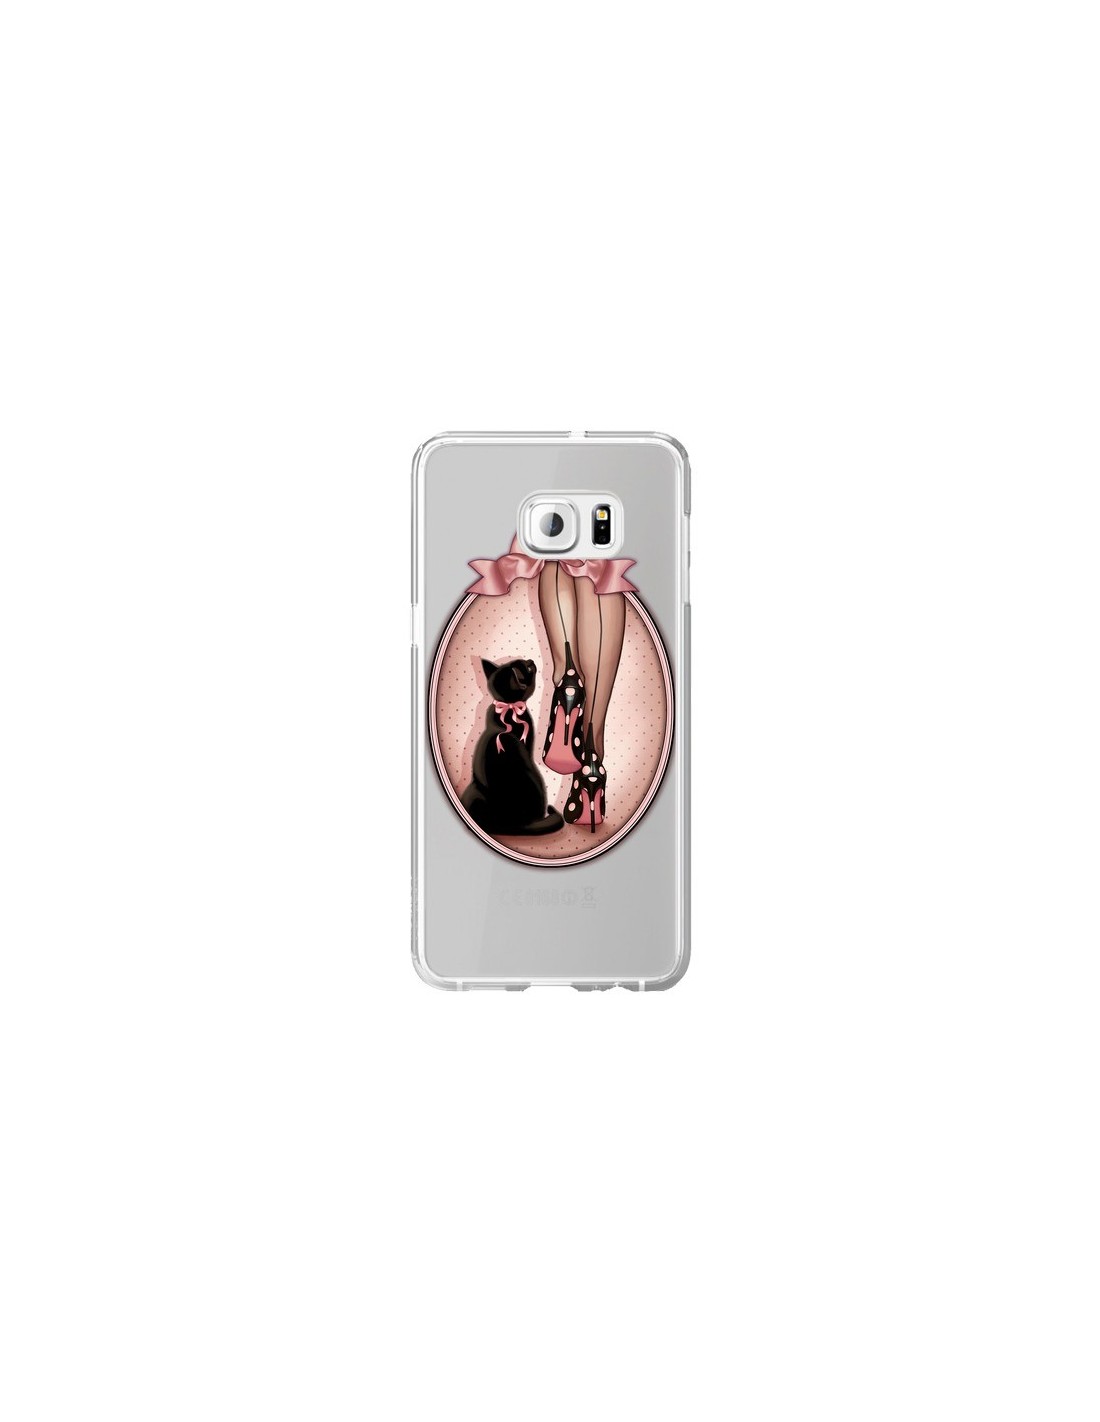 coque samsung s6 chat